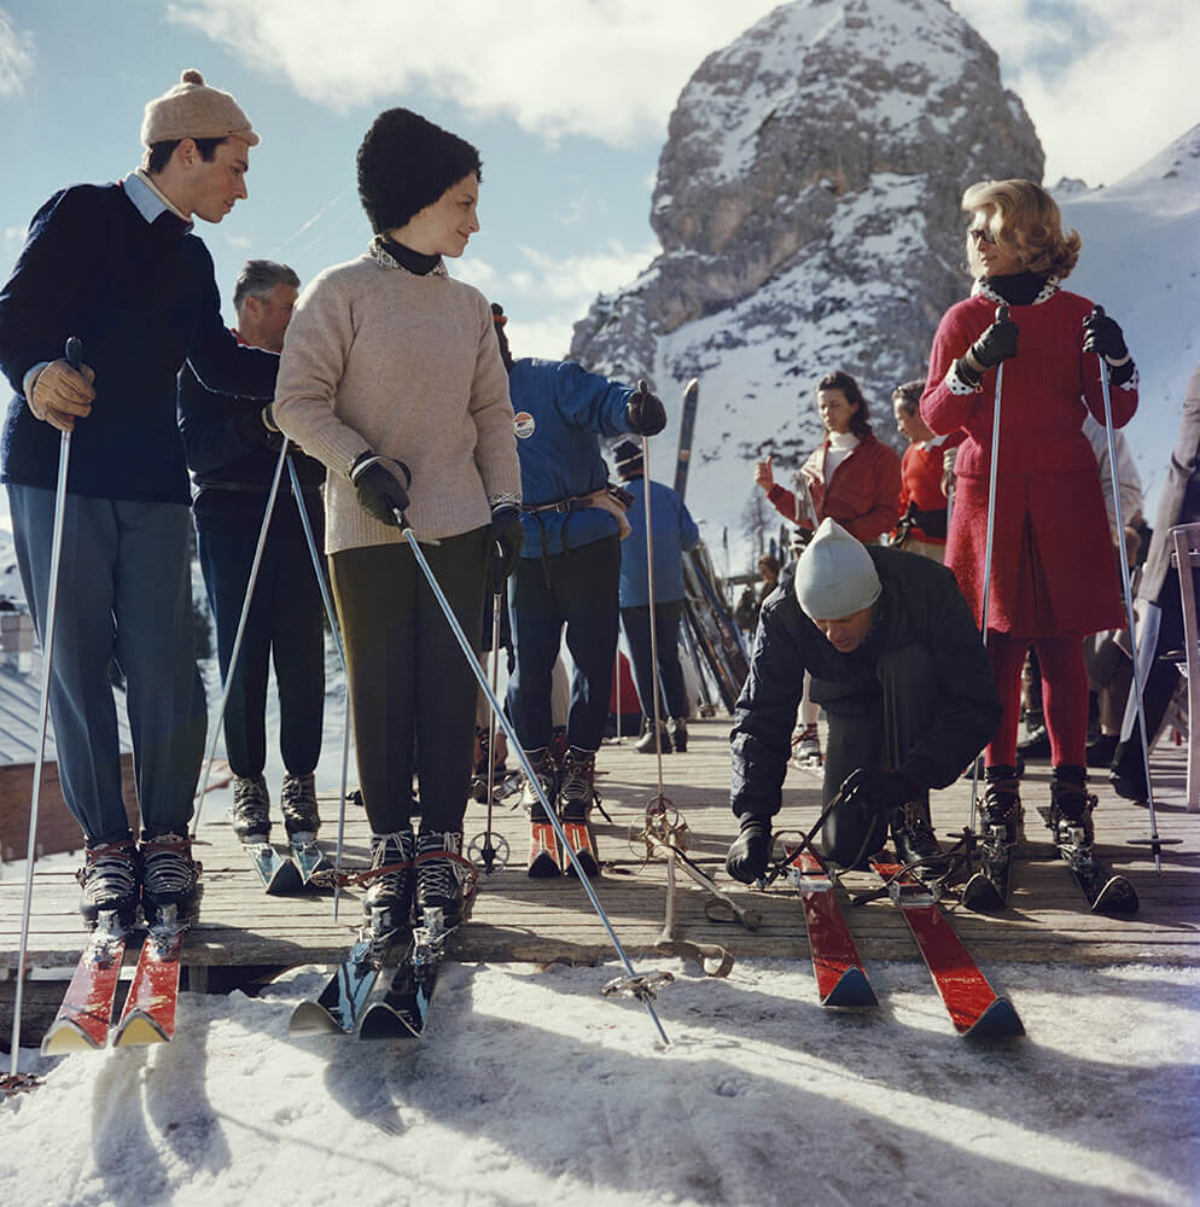 Skiers at Cortina D’Ampezzo in Italy, 1962.